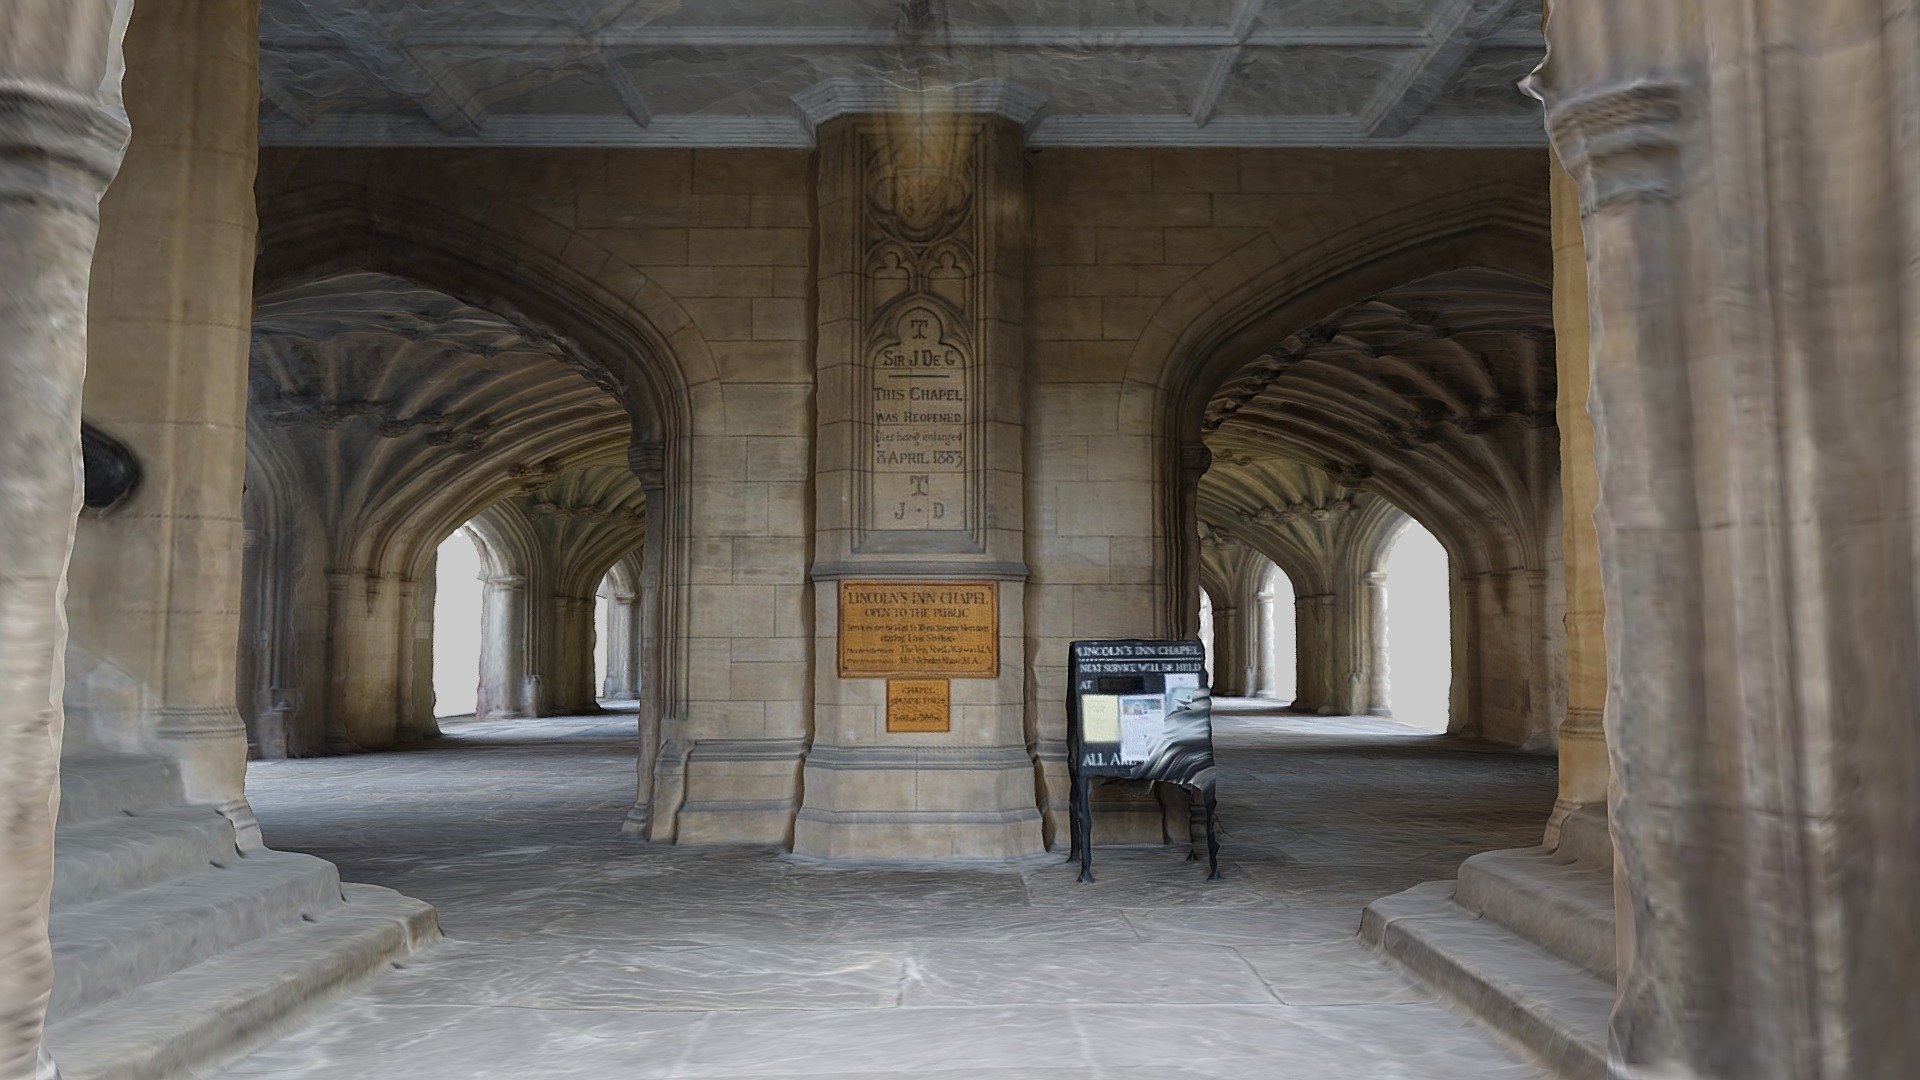 The undercroft of Lincoln's Inn Chapel, London.

https://en.wikipedia.org/wiki/Lincoln%27s_Inn

Photos taken in February 2019 with a Sony a6000 and processed in Agisoft Metashape.

There is a more recent and better quality scan of this location here: https://skfb.ly/oItqQ - Lincolns Inn Chapel Undercroft - Download Free 3D model by artfletch 3d model